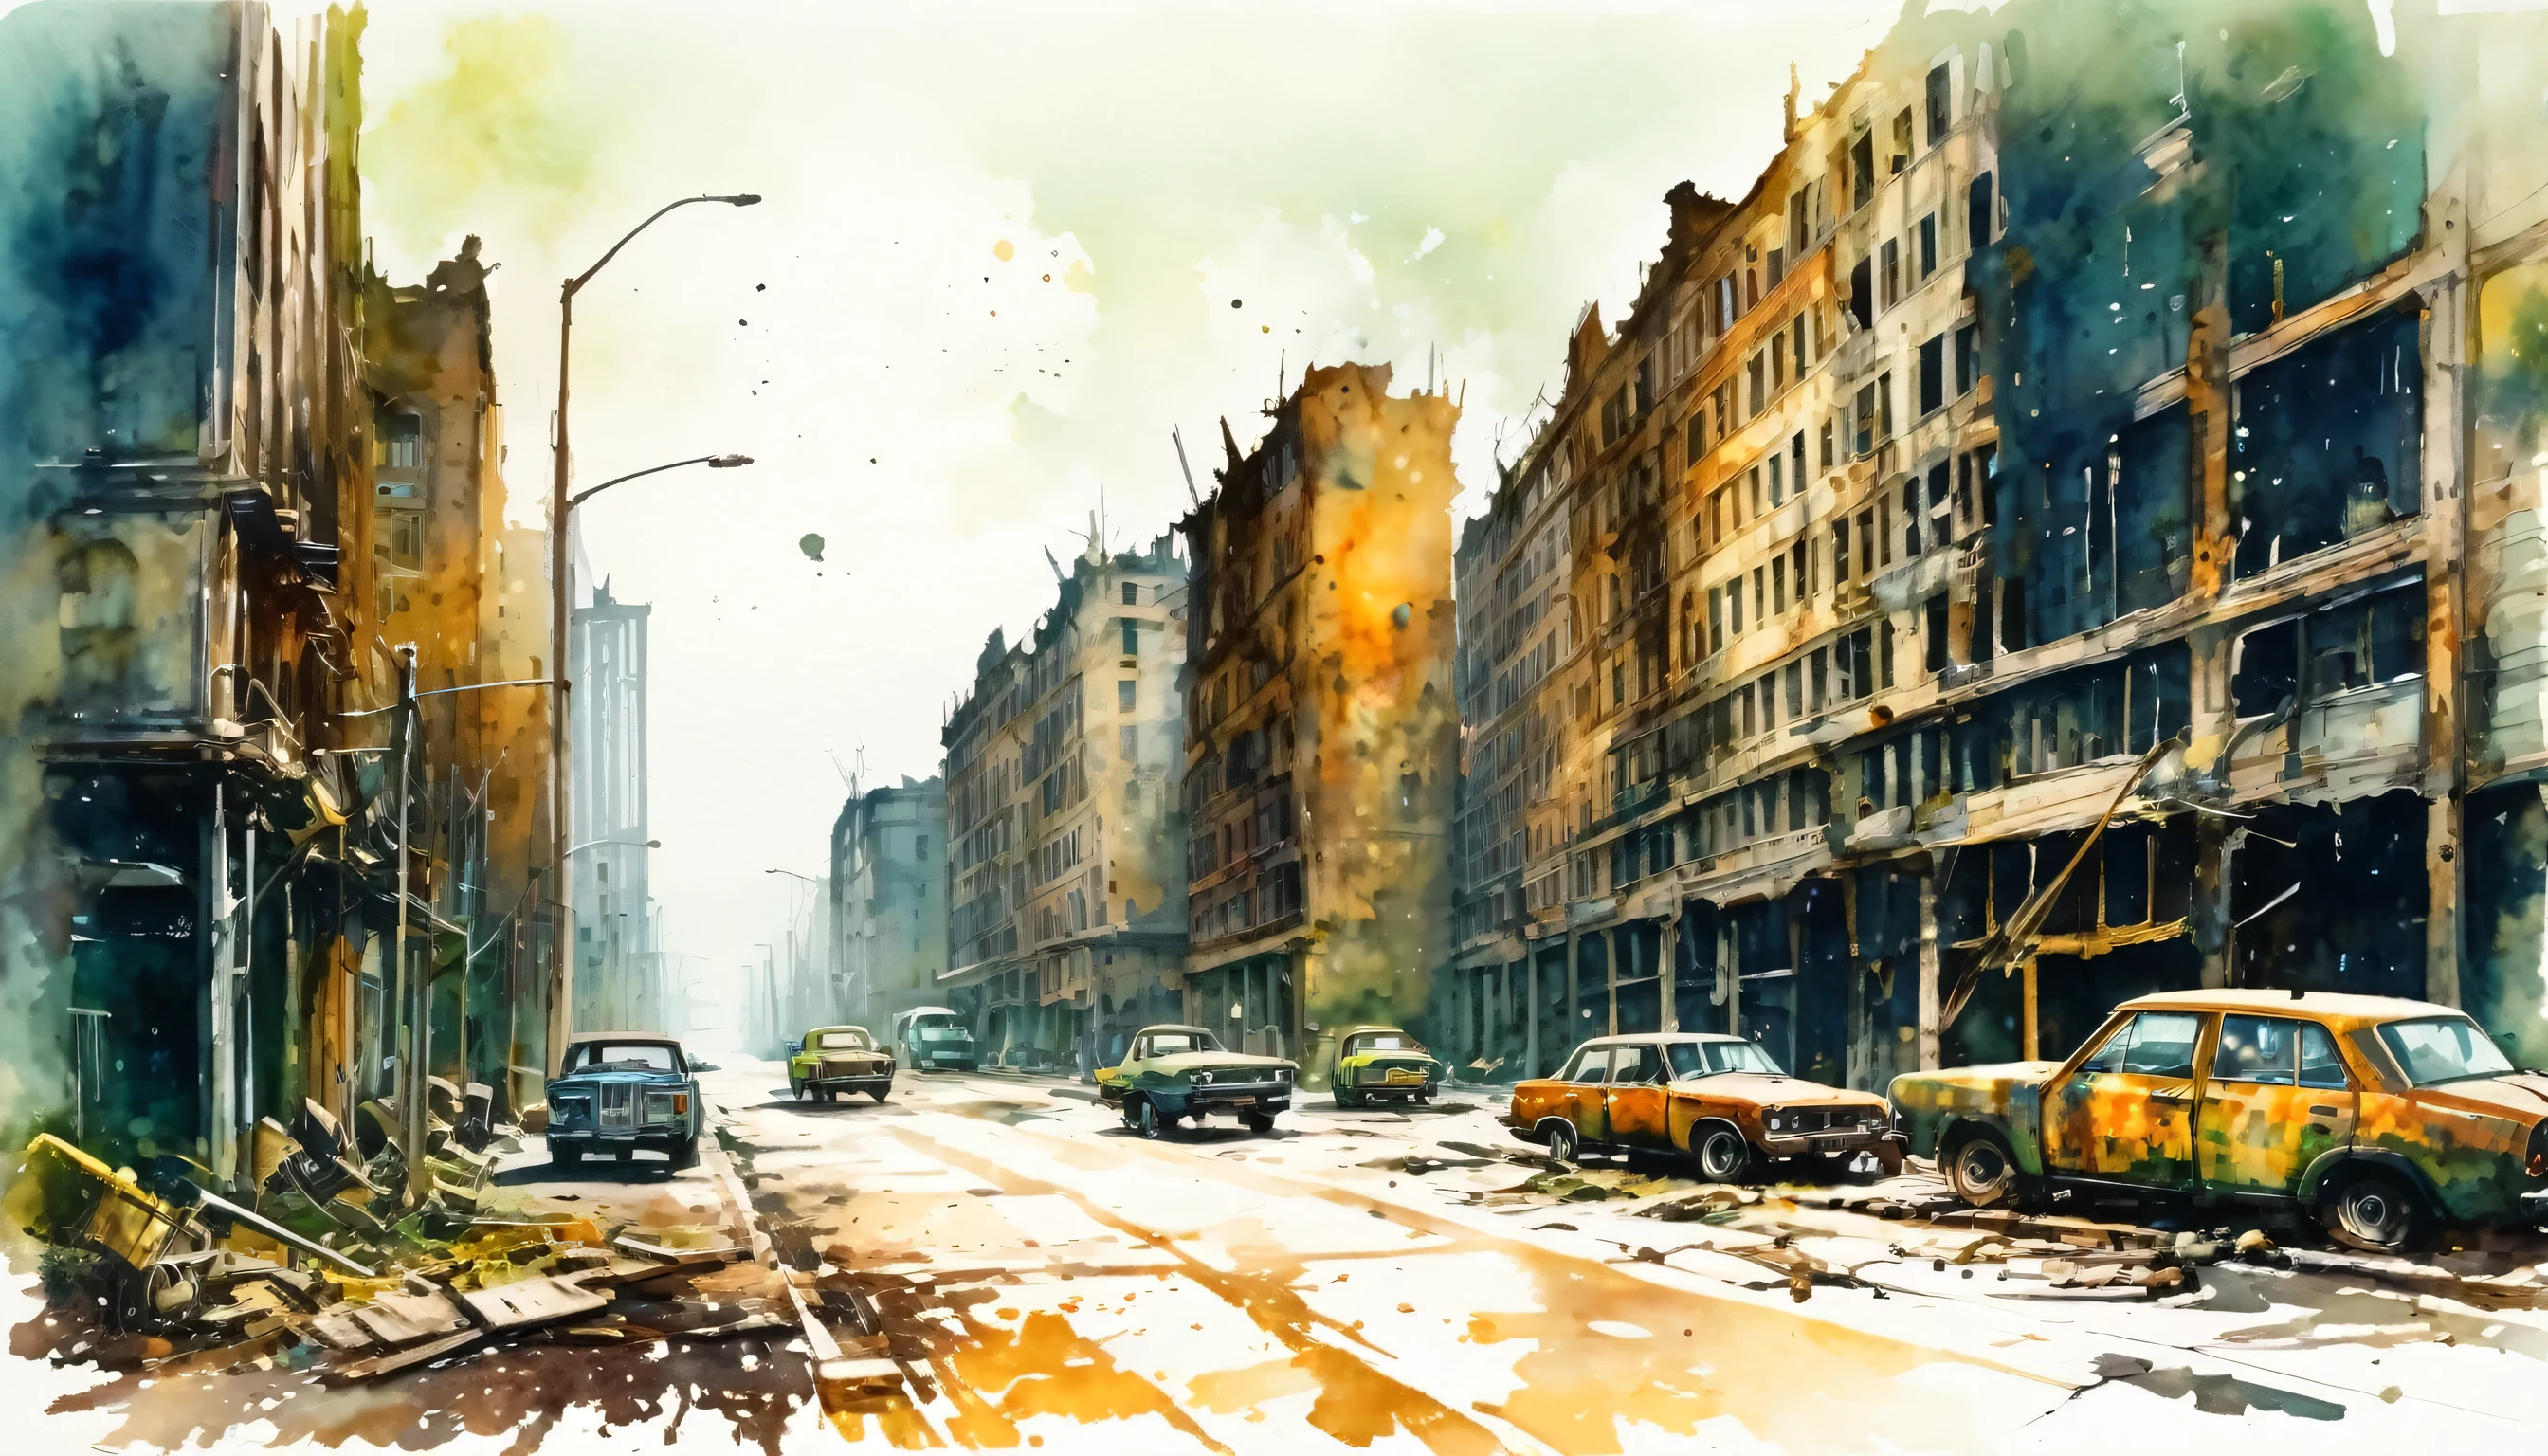 Post Apocalyptic scene, a city in ruins, a city with tall destroyed buildings, destroyed rusty cars parked outdoors, cityscape, post-apocalypse, road, ragged people walking the street, dark atmosphere, creepy, modern art, painting, drawing, watercolor, psychedelic colors